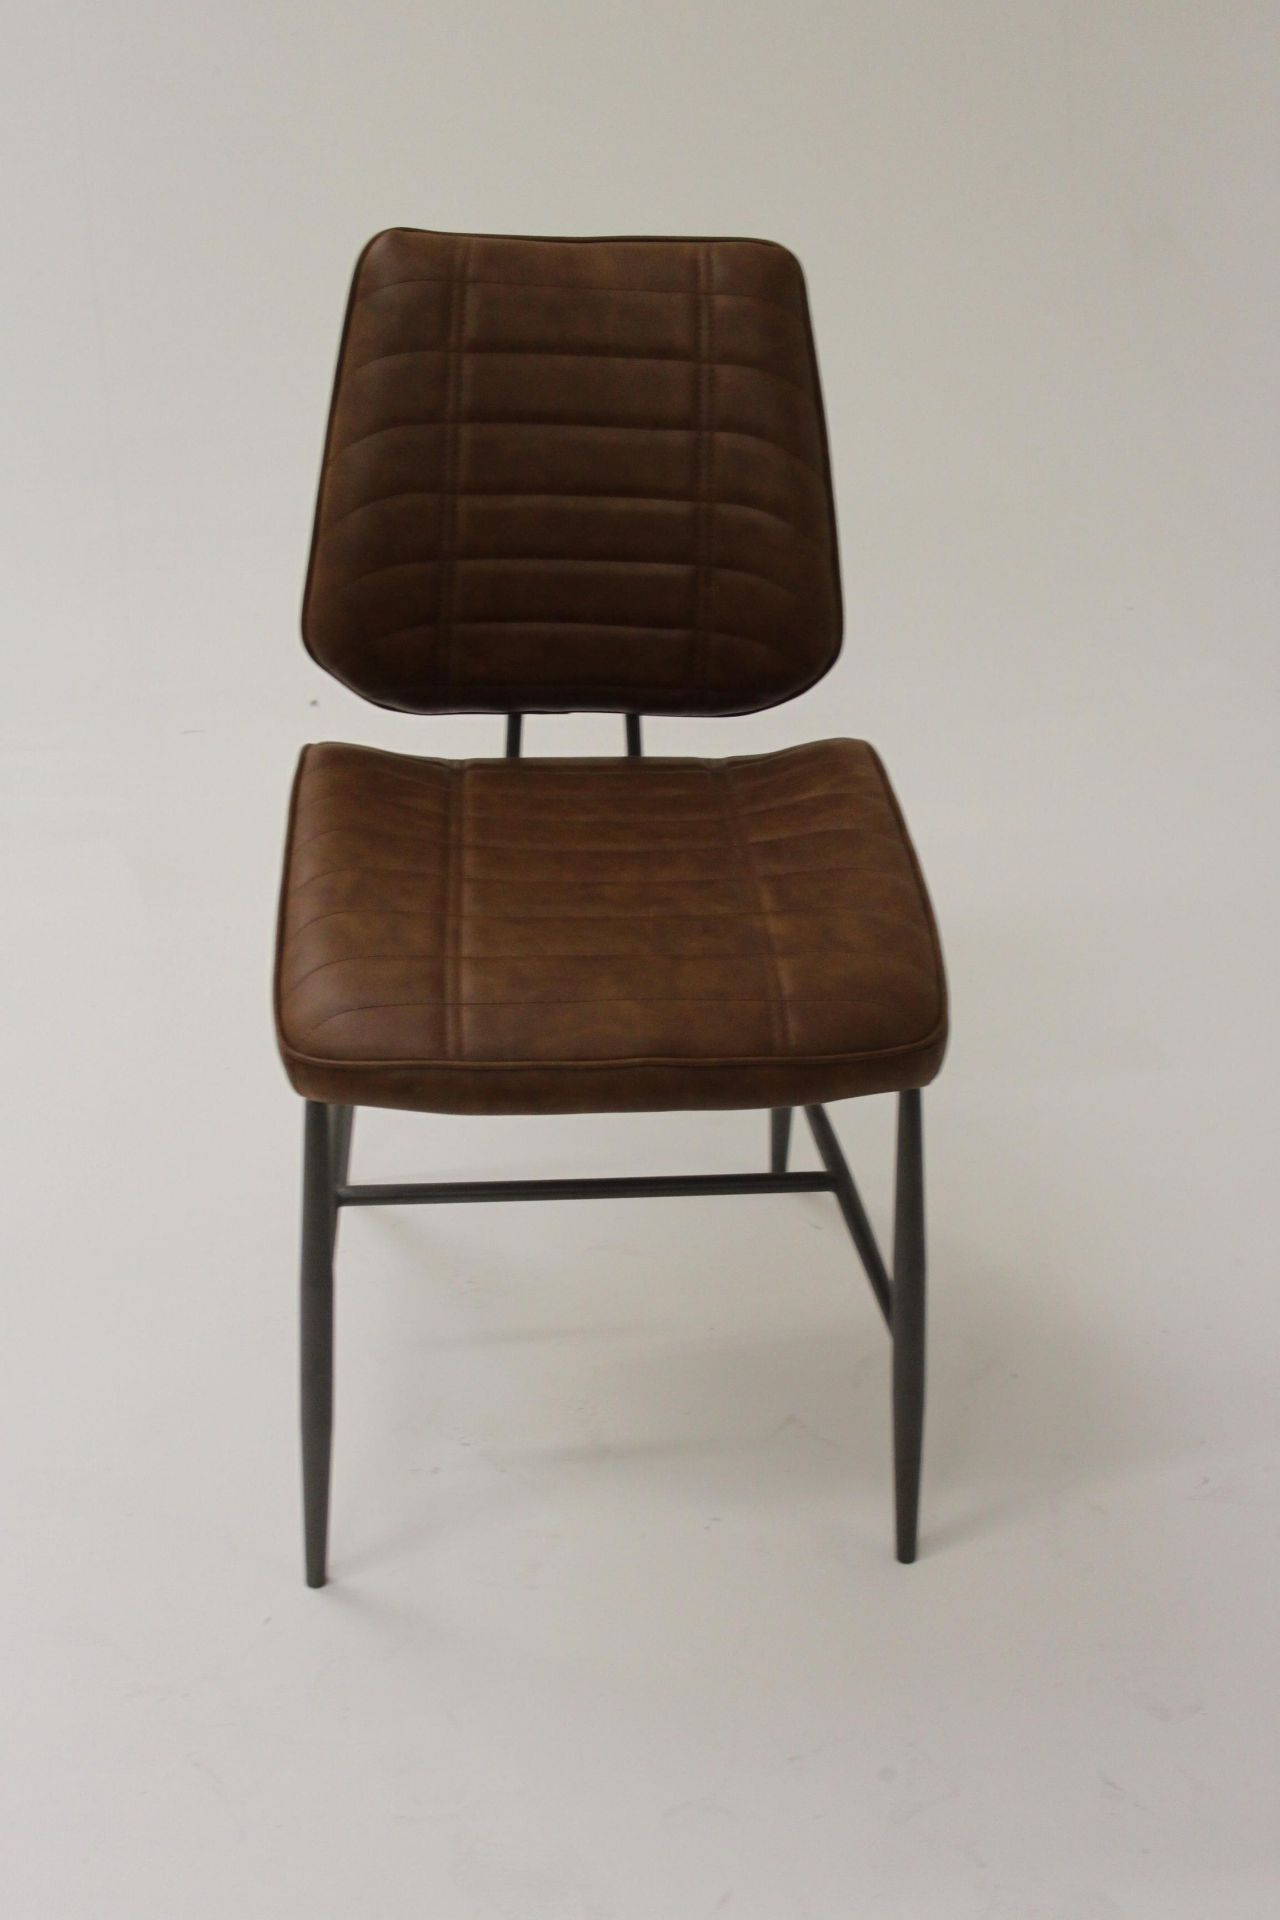 Cortina Chair Tan Inspired By Classic Car Seat Design These Chairs A Modern Stylish Appeal High - Image 4 of 5